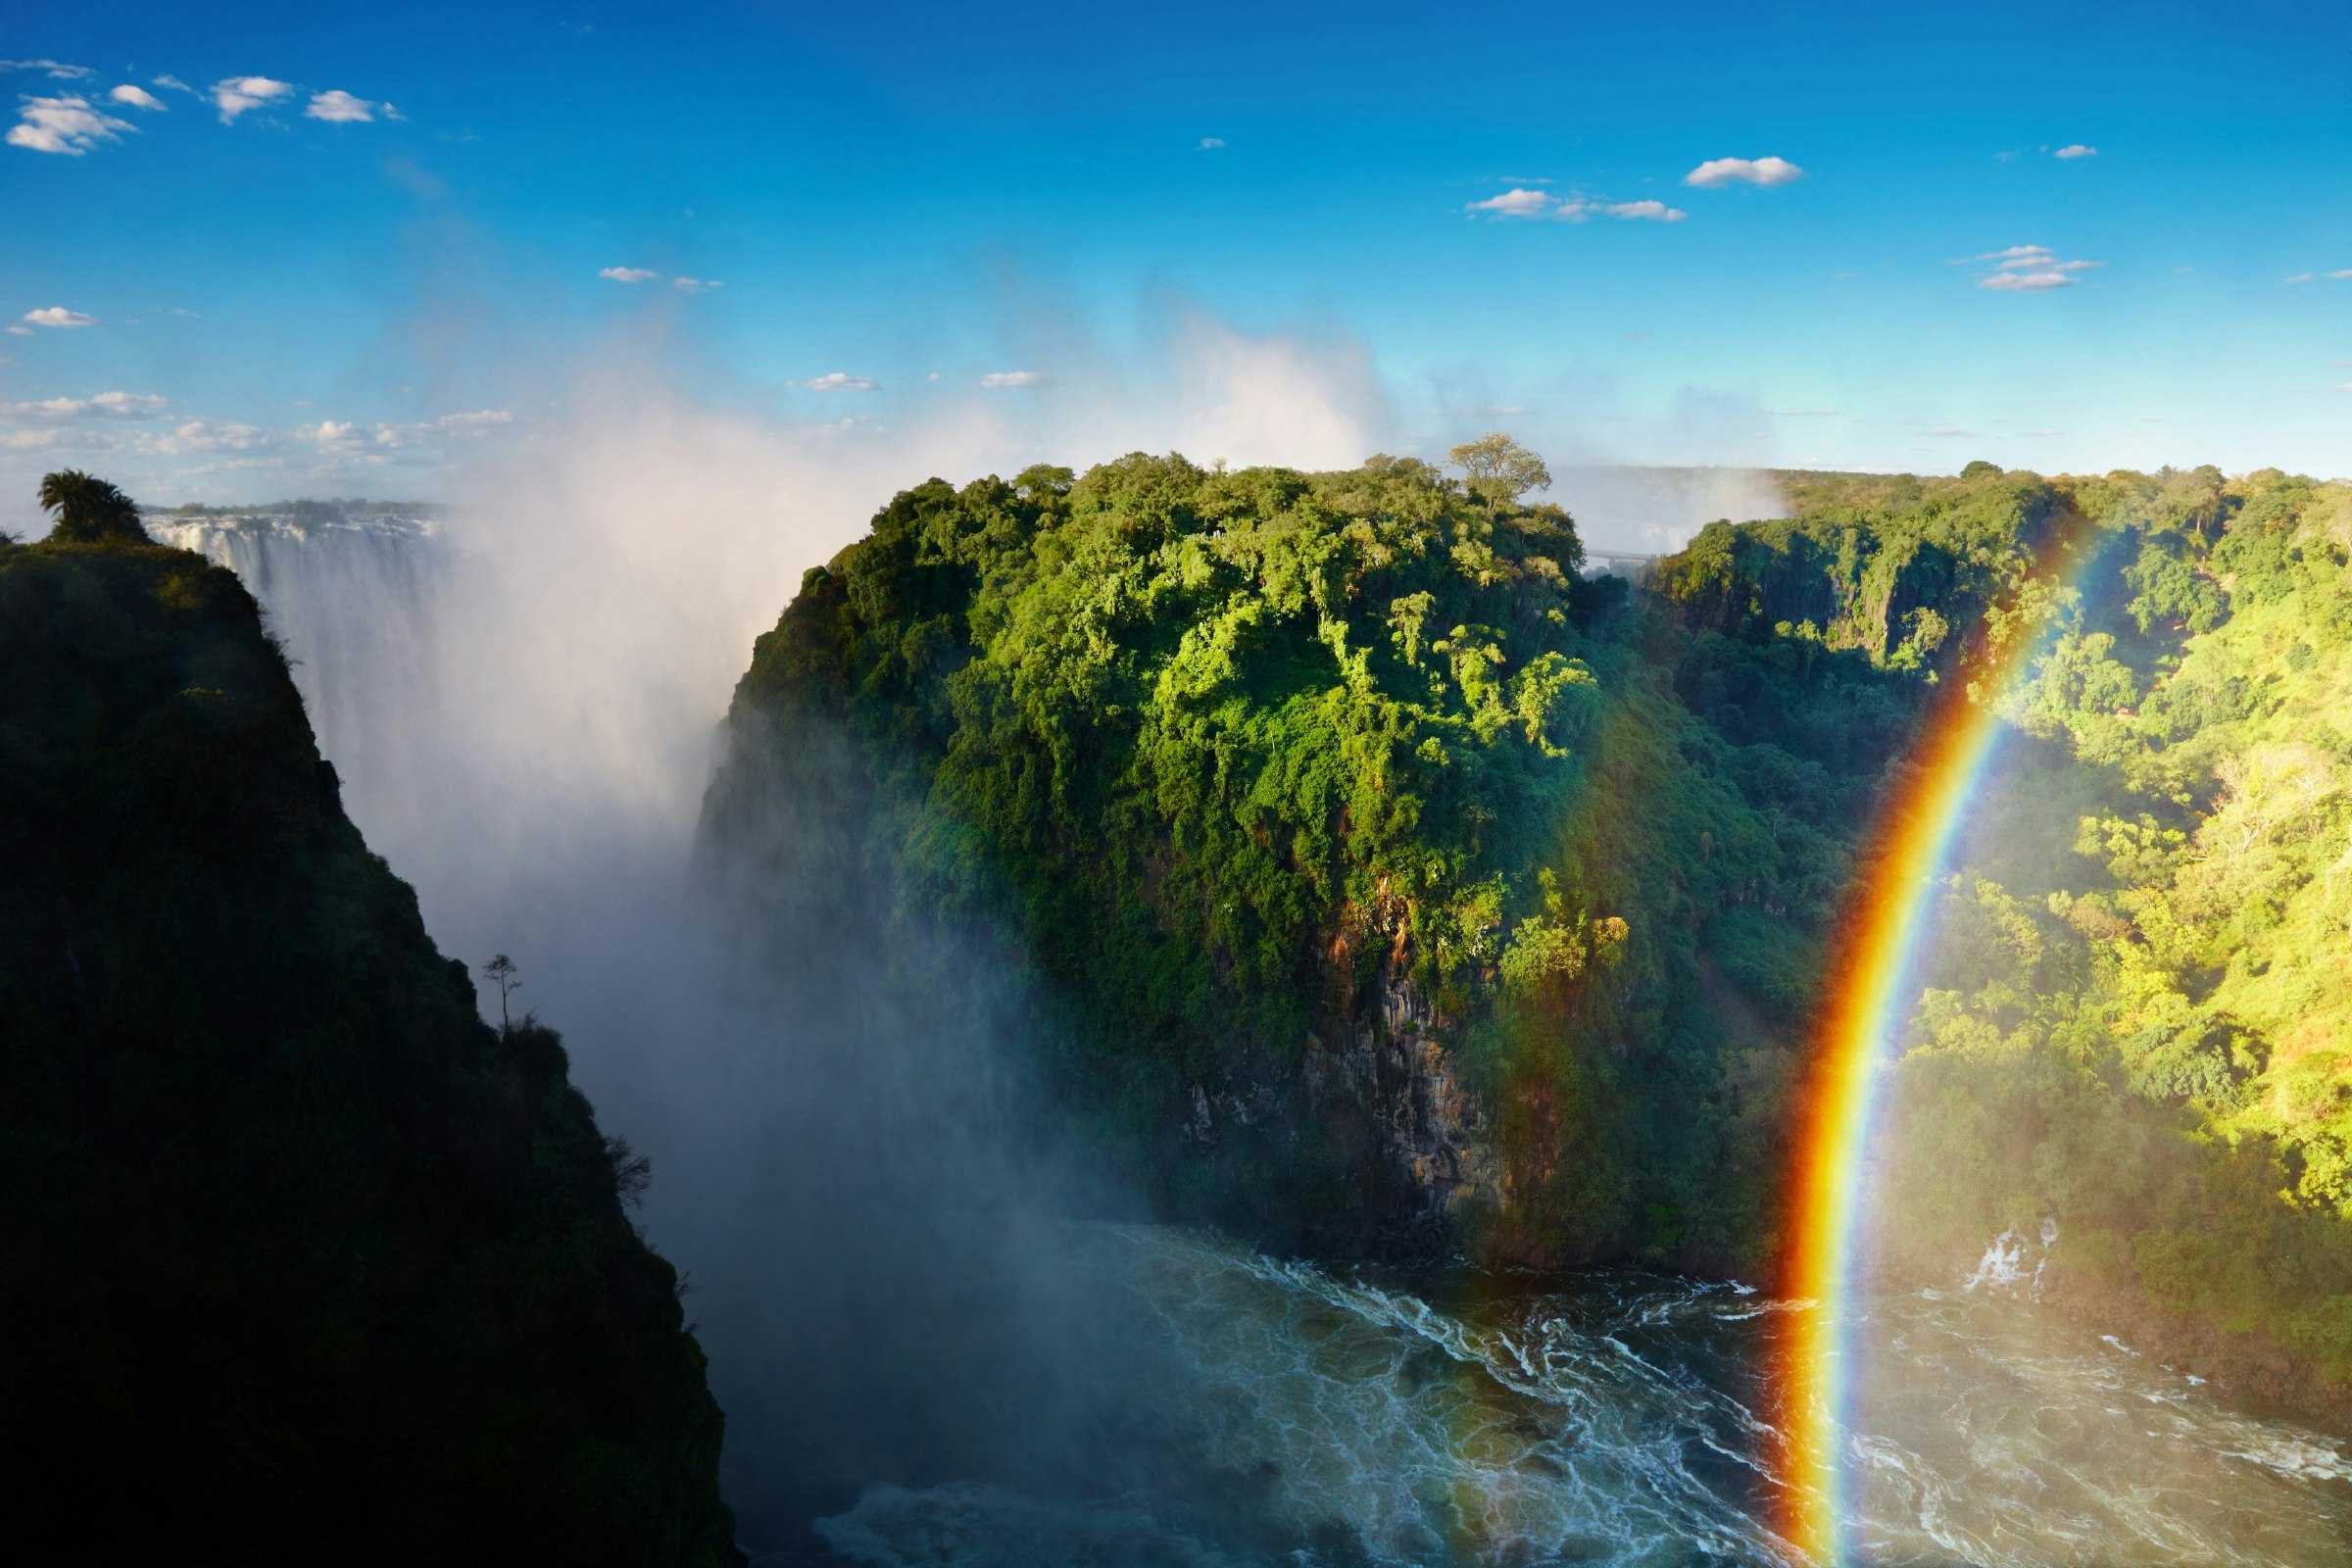 Between a silhouetted rocky cliff and rainforest-clad outcrop is a seething Zambezi; a arching rainbow bills the right of the image, while the Victoria Falls are seen 'smoking' between the two cliffs.